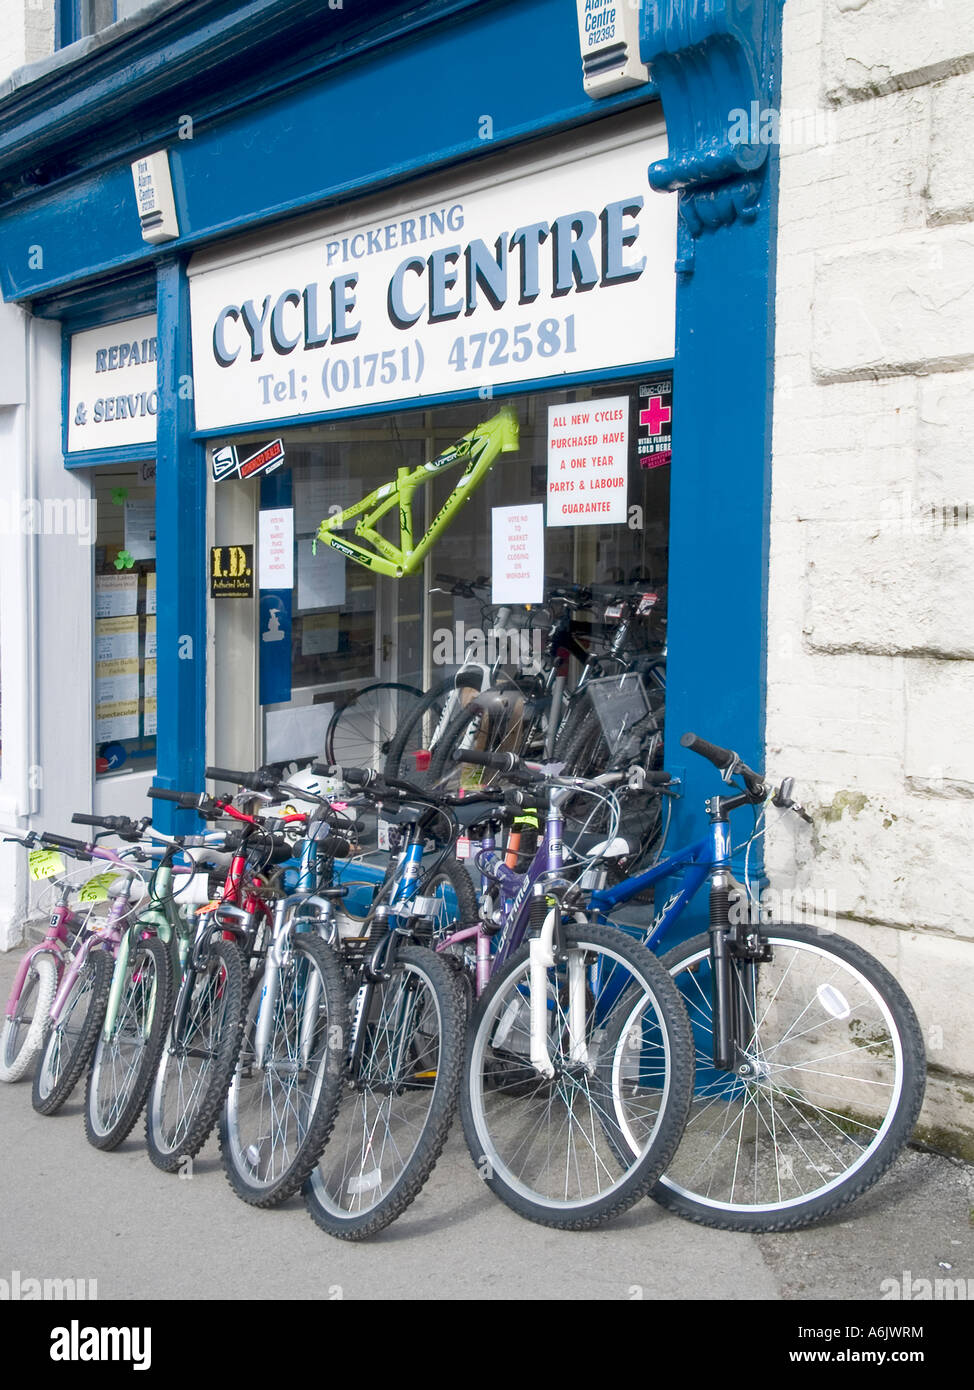 Bicycle shop in Pickering North Yorkshire Stock Photo